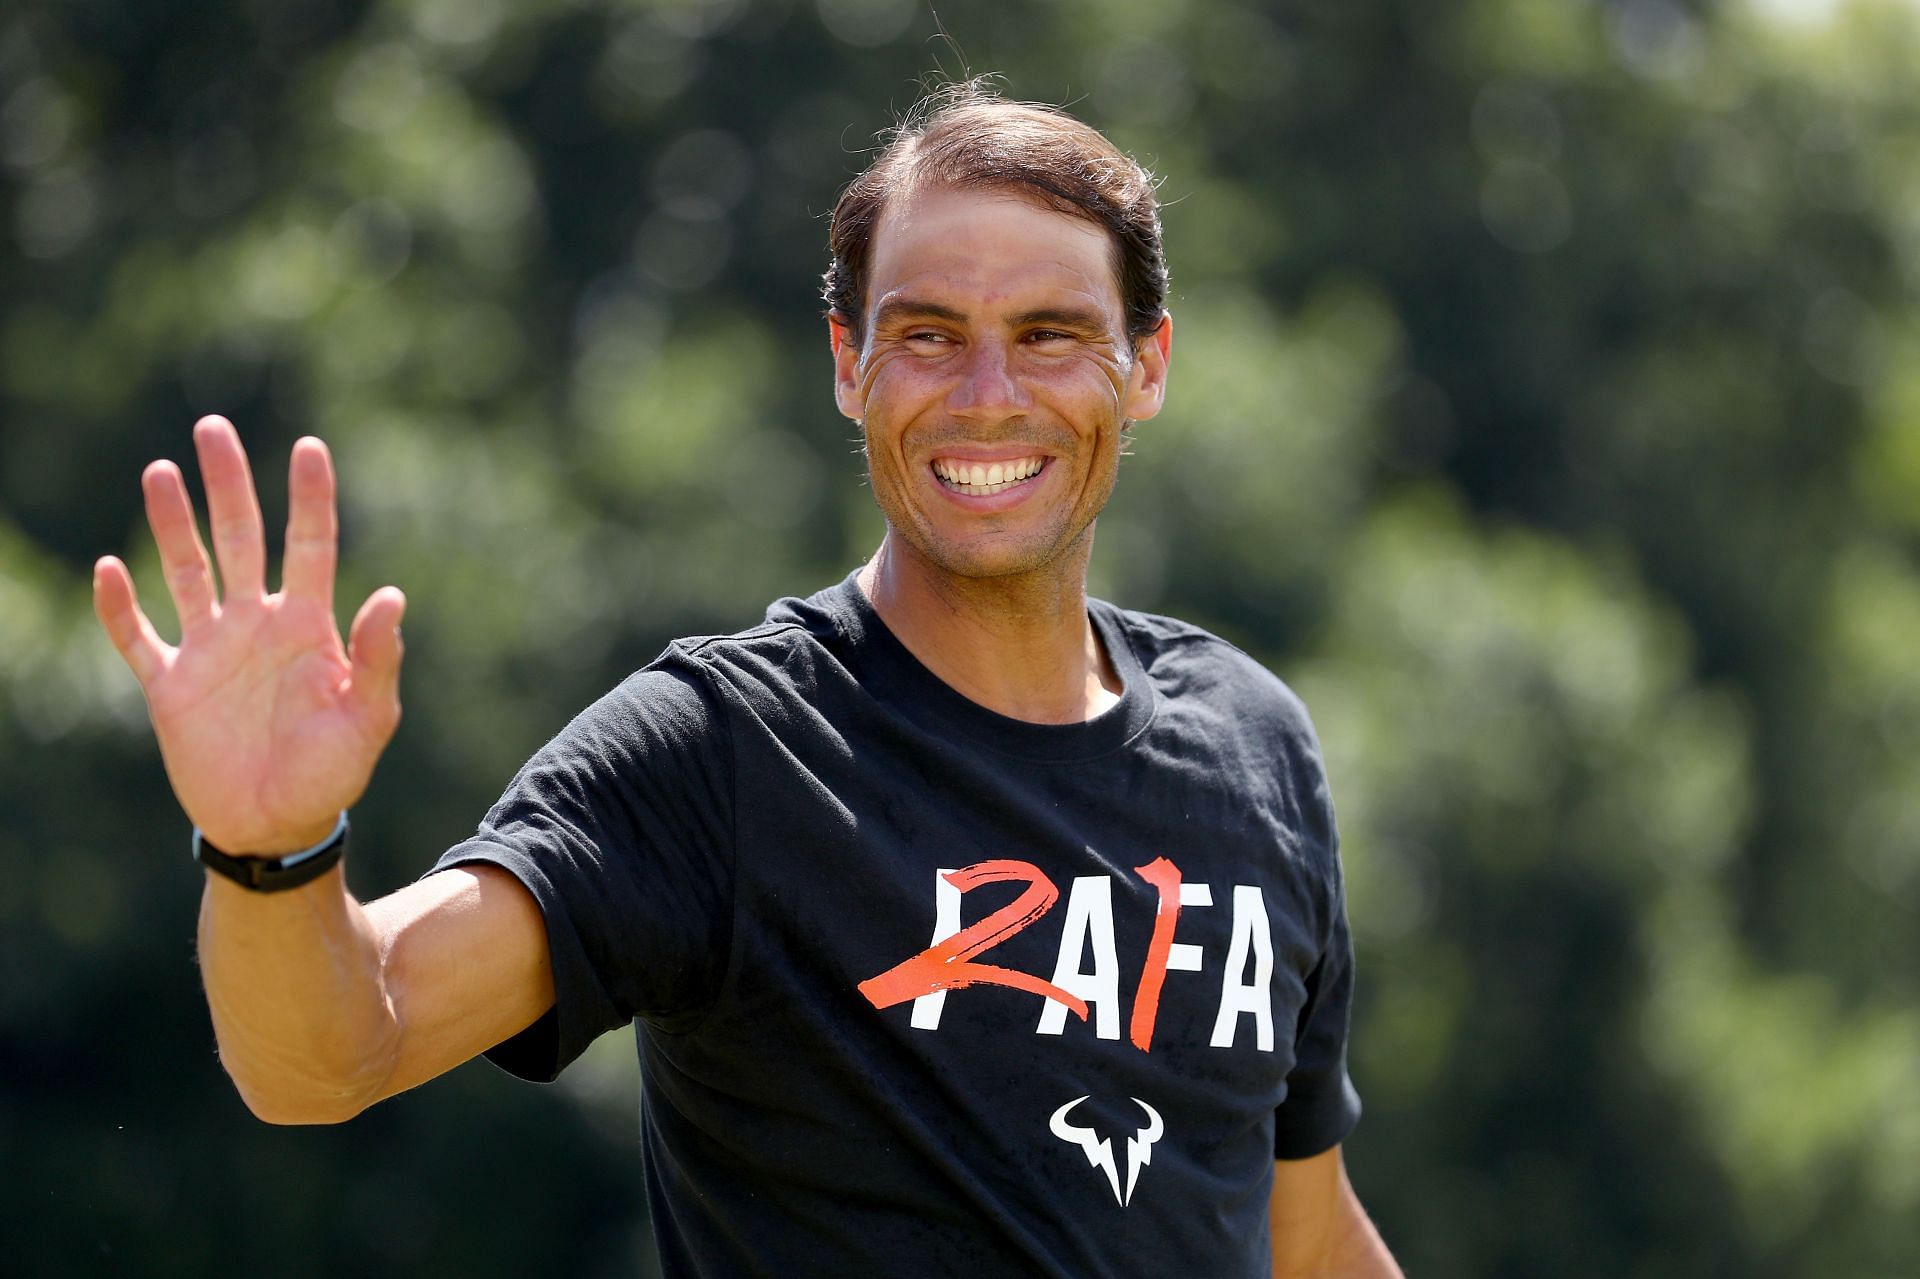 Rafael Nadal at a media photocall after his 2022 Australian Open win